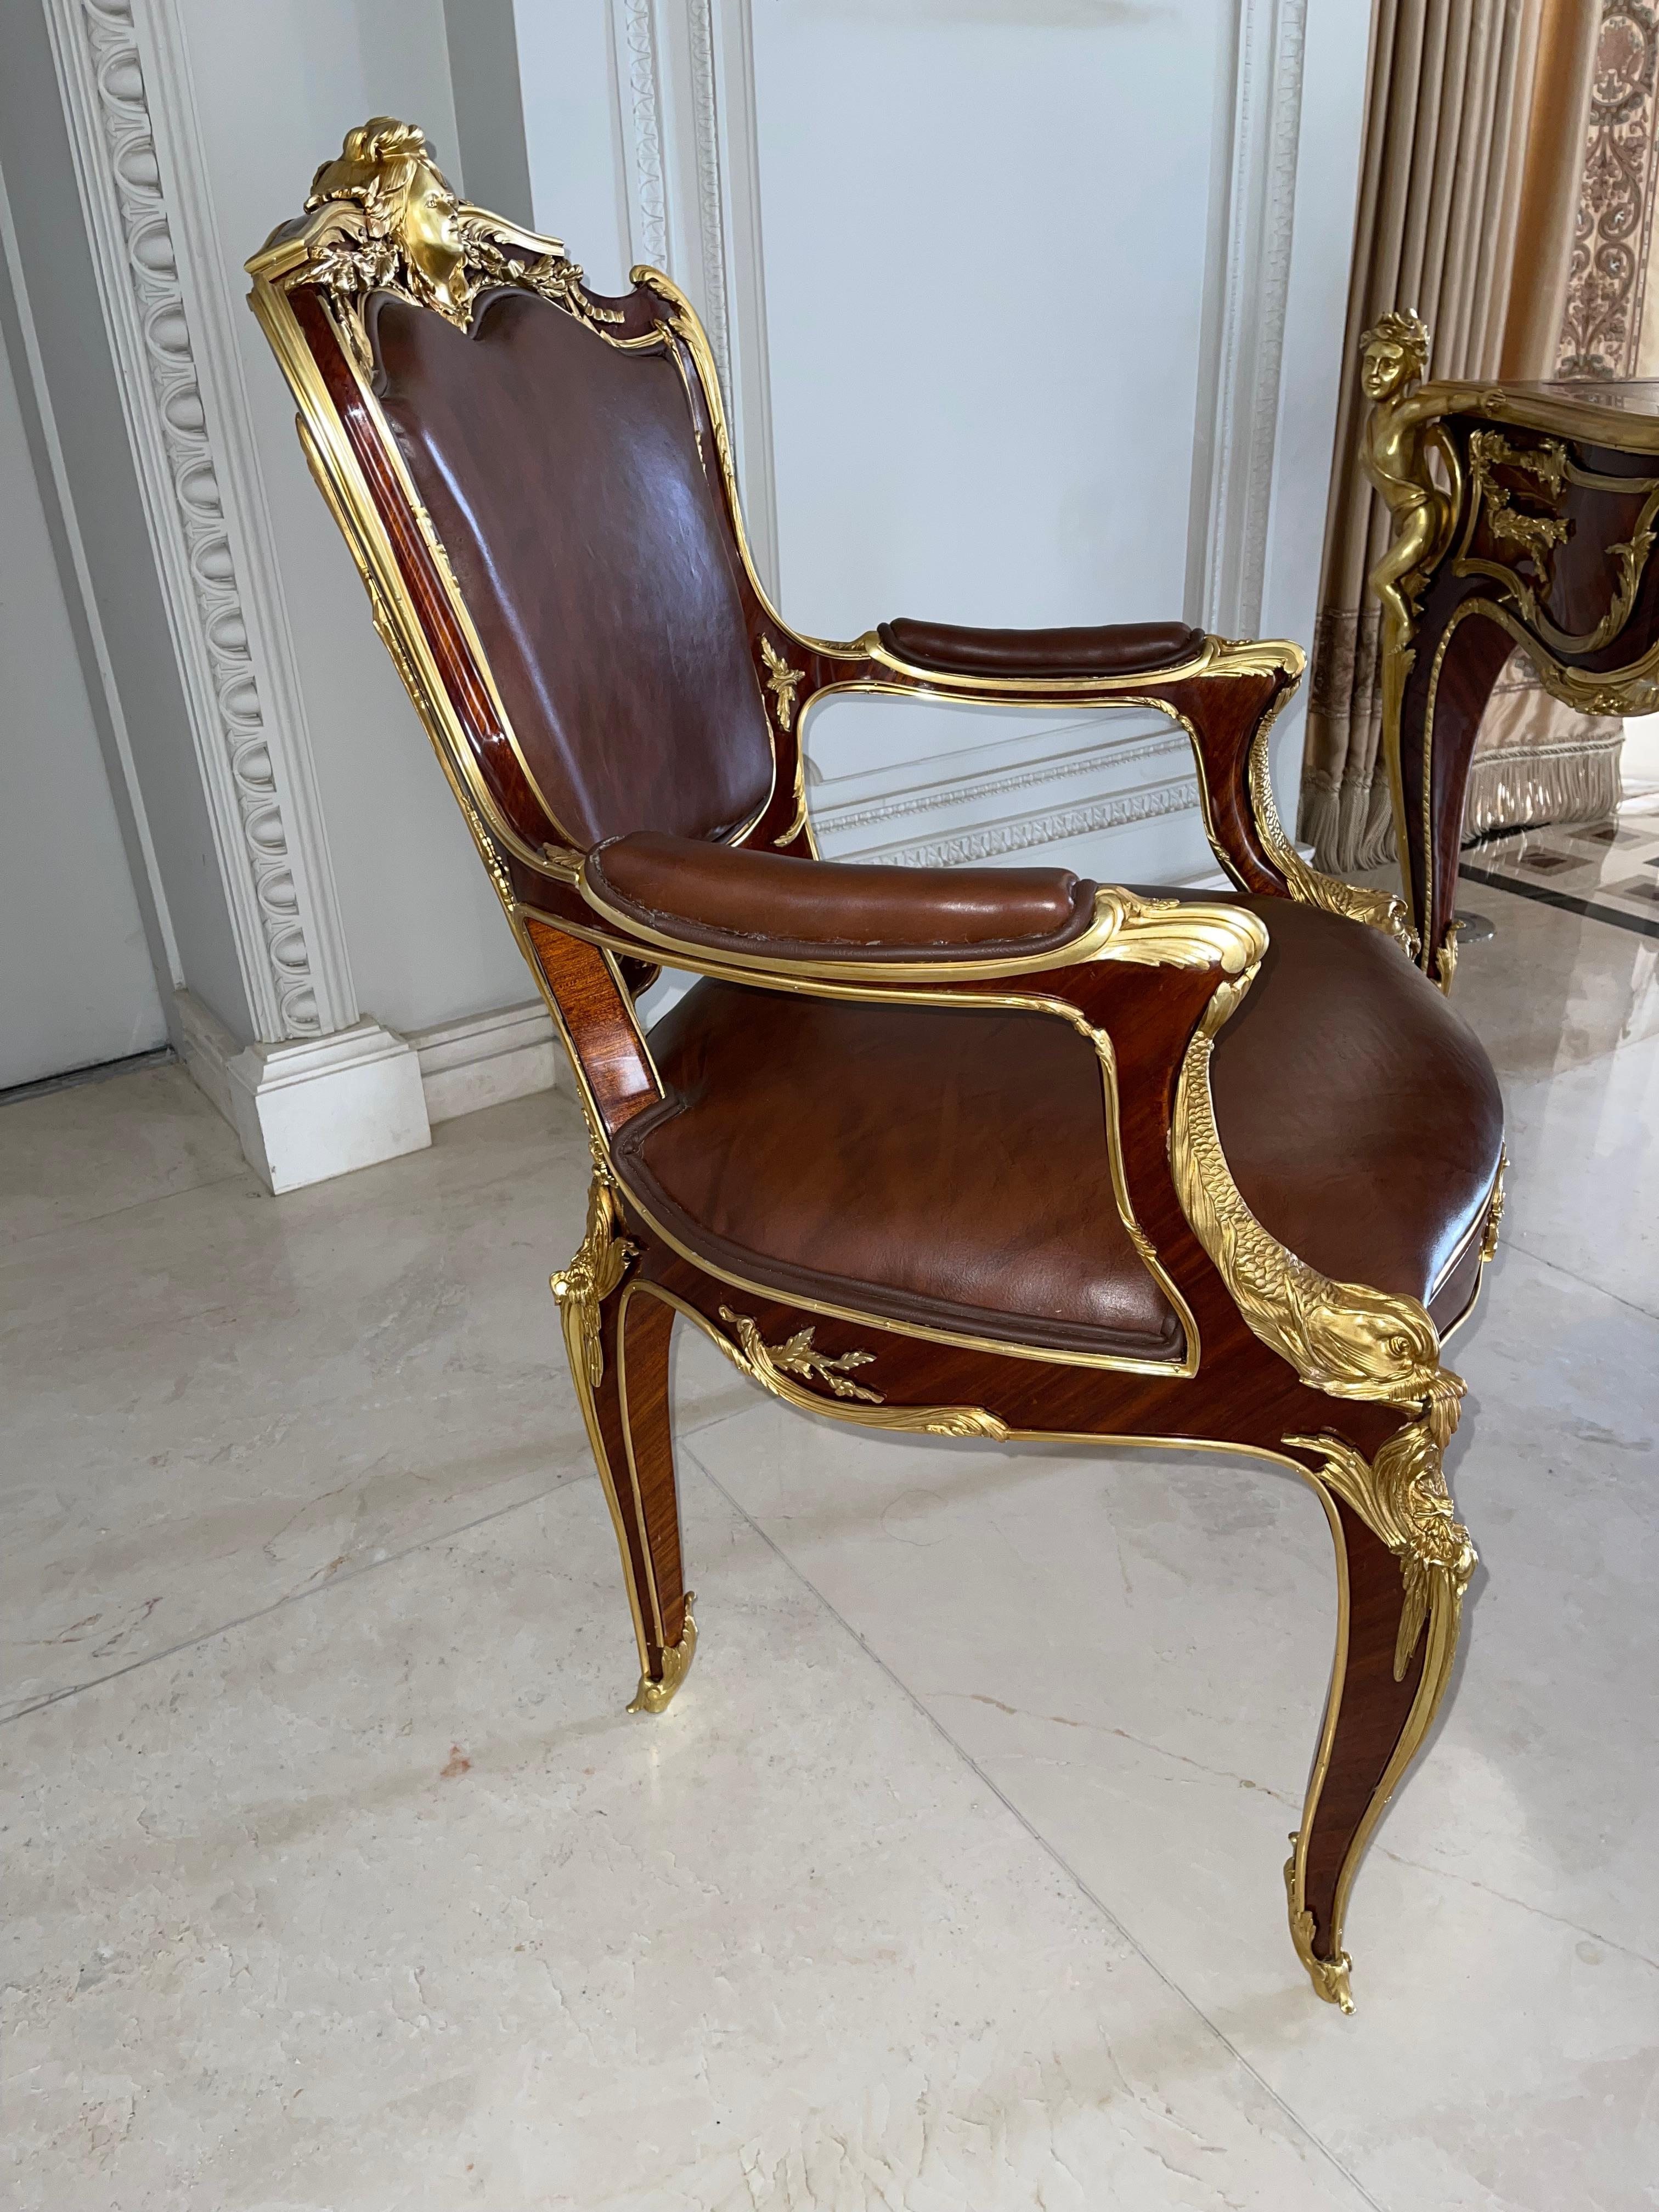 Magnificent and royal armchair after Francois Linke, Paris

A French ormolu-mounted Kingwood Fauteuil De Bureau
by Francois Linke, I
The cartouche-shaped back with rocaille-pedimented top rail centred by a female mask wreathed in ribbon-tied oak